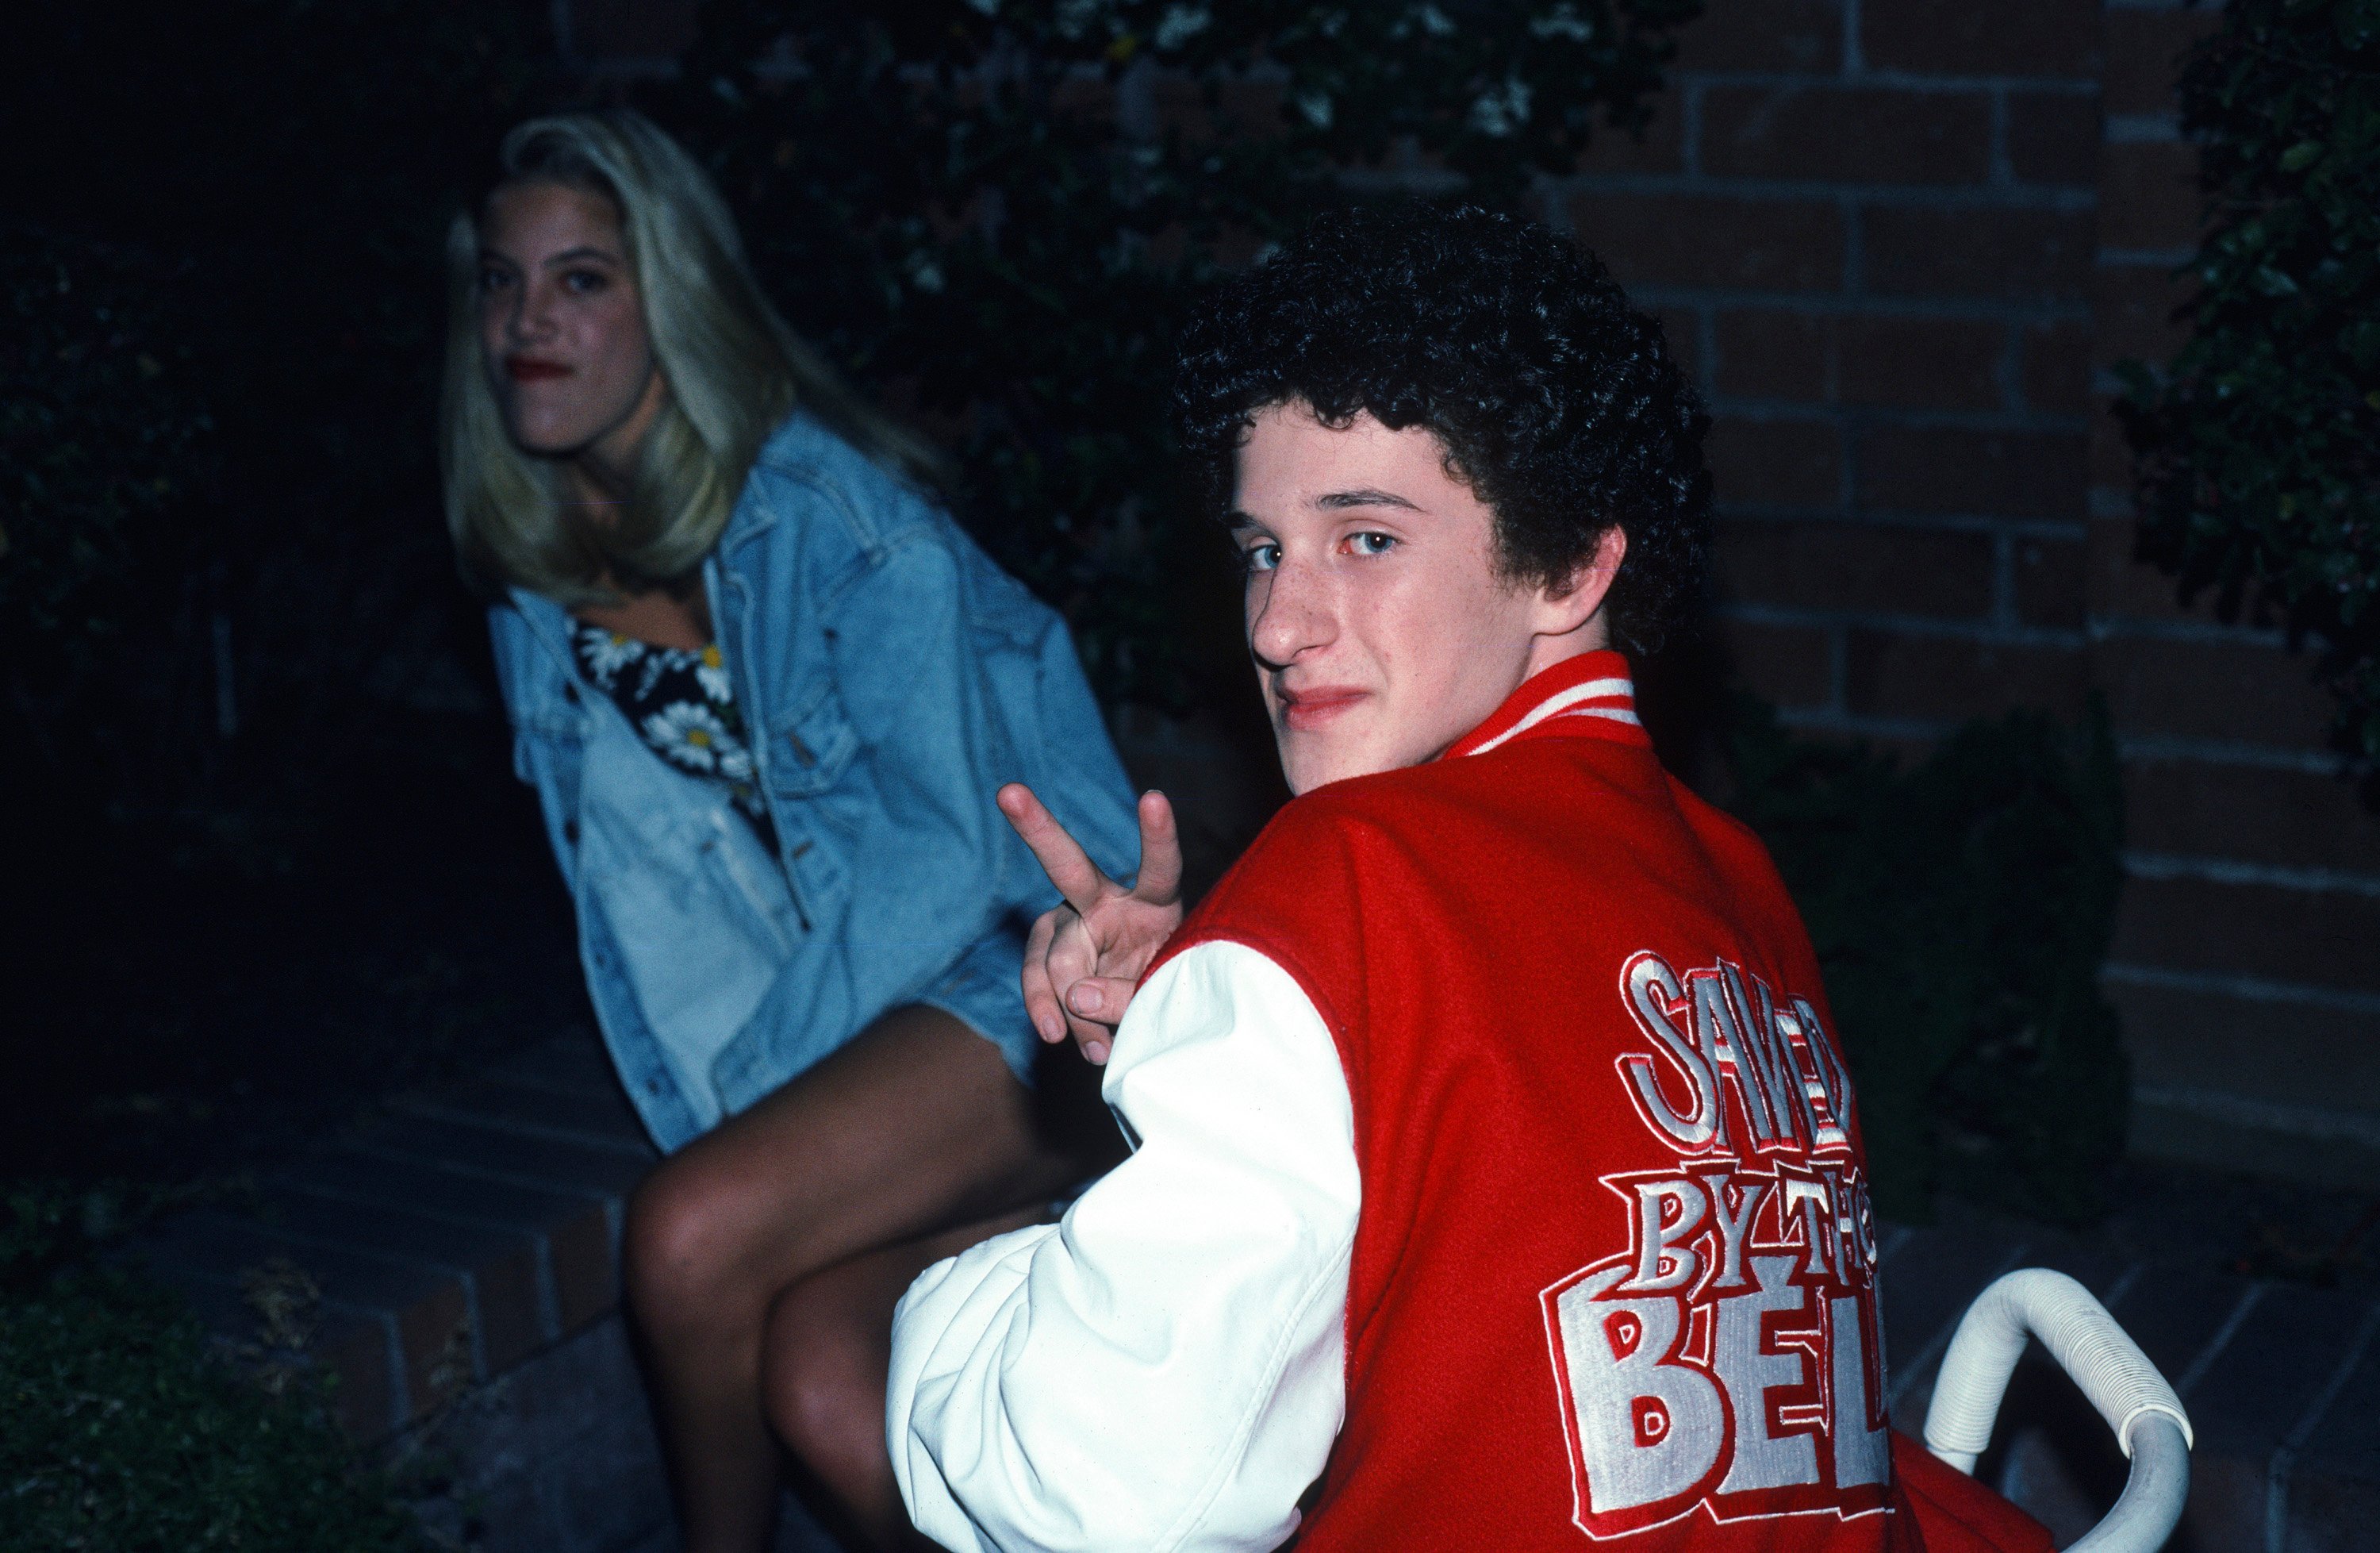 Dustin Diamond and Tori Spelling | Alice S. Hall/NBCU Photo Bank/NBCUniversal via Getty Images 